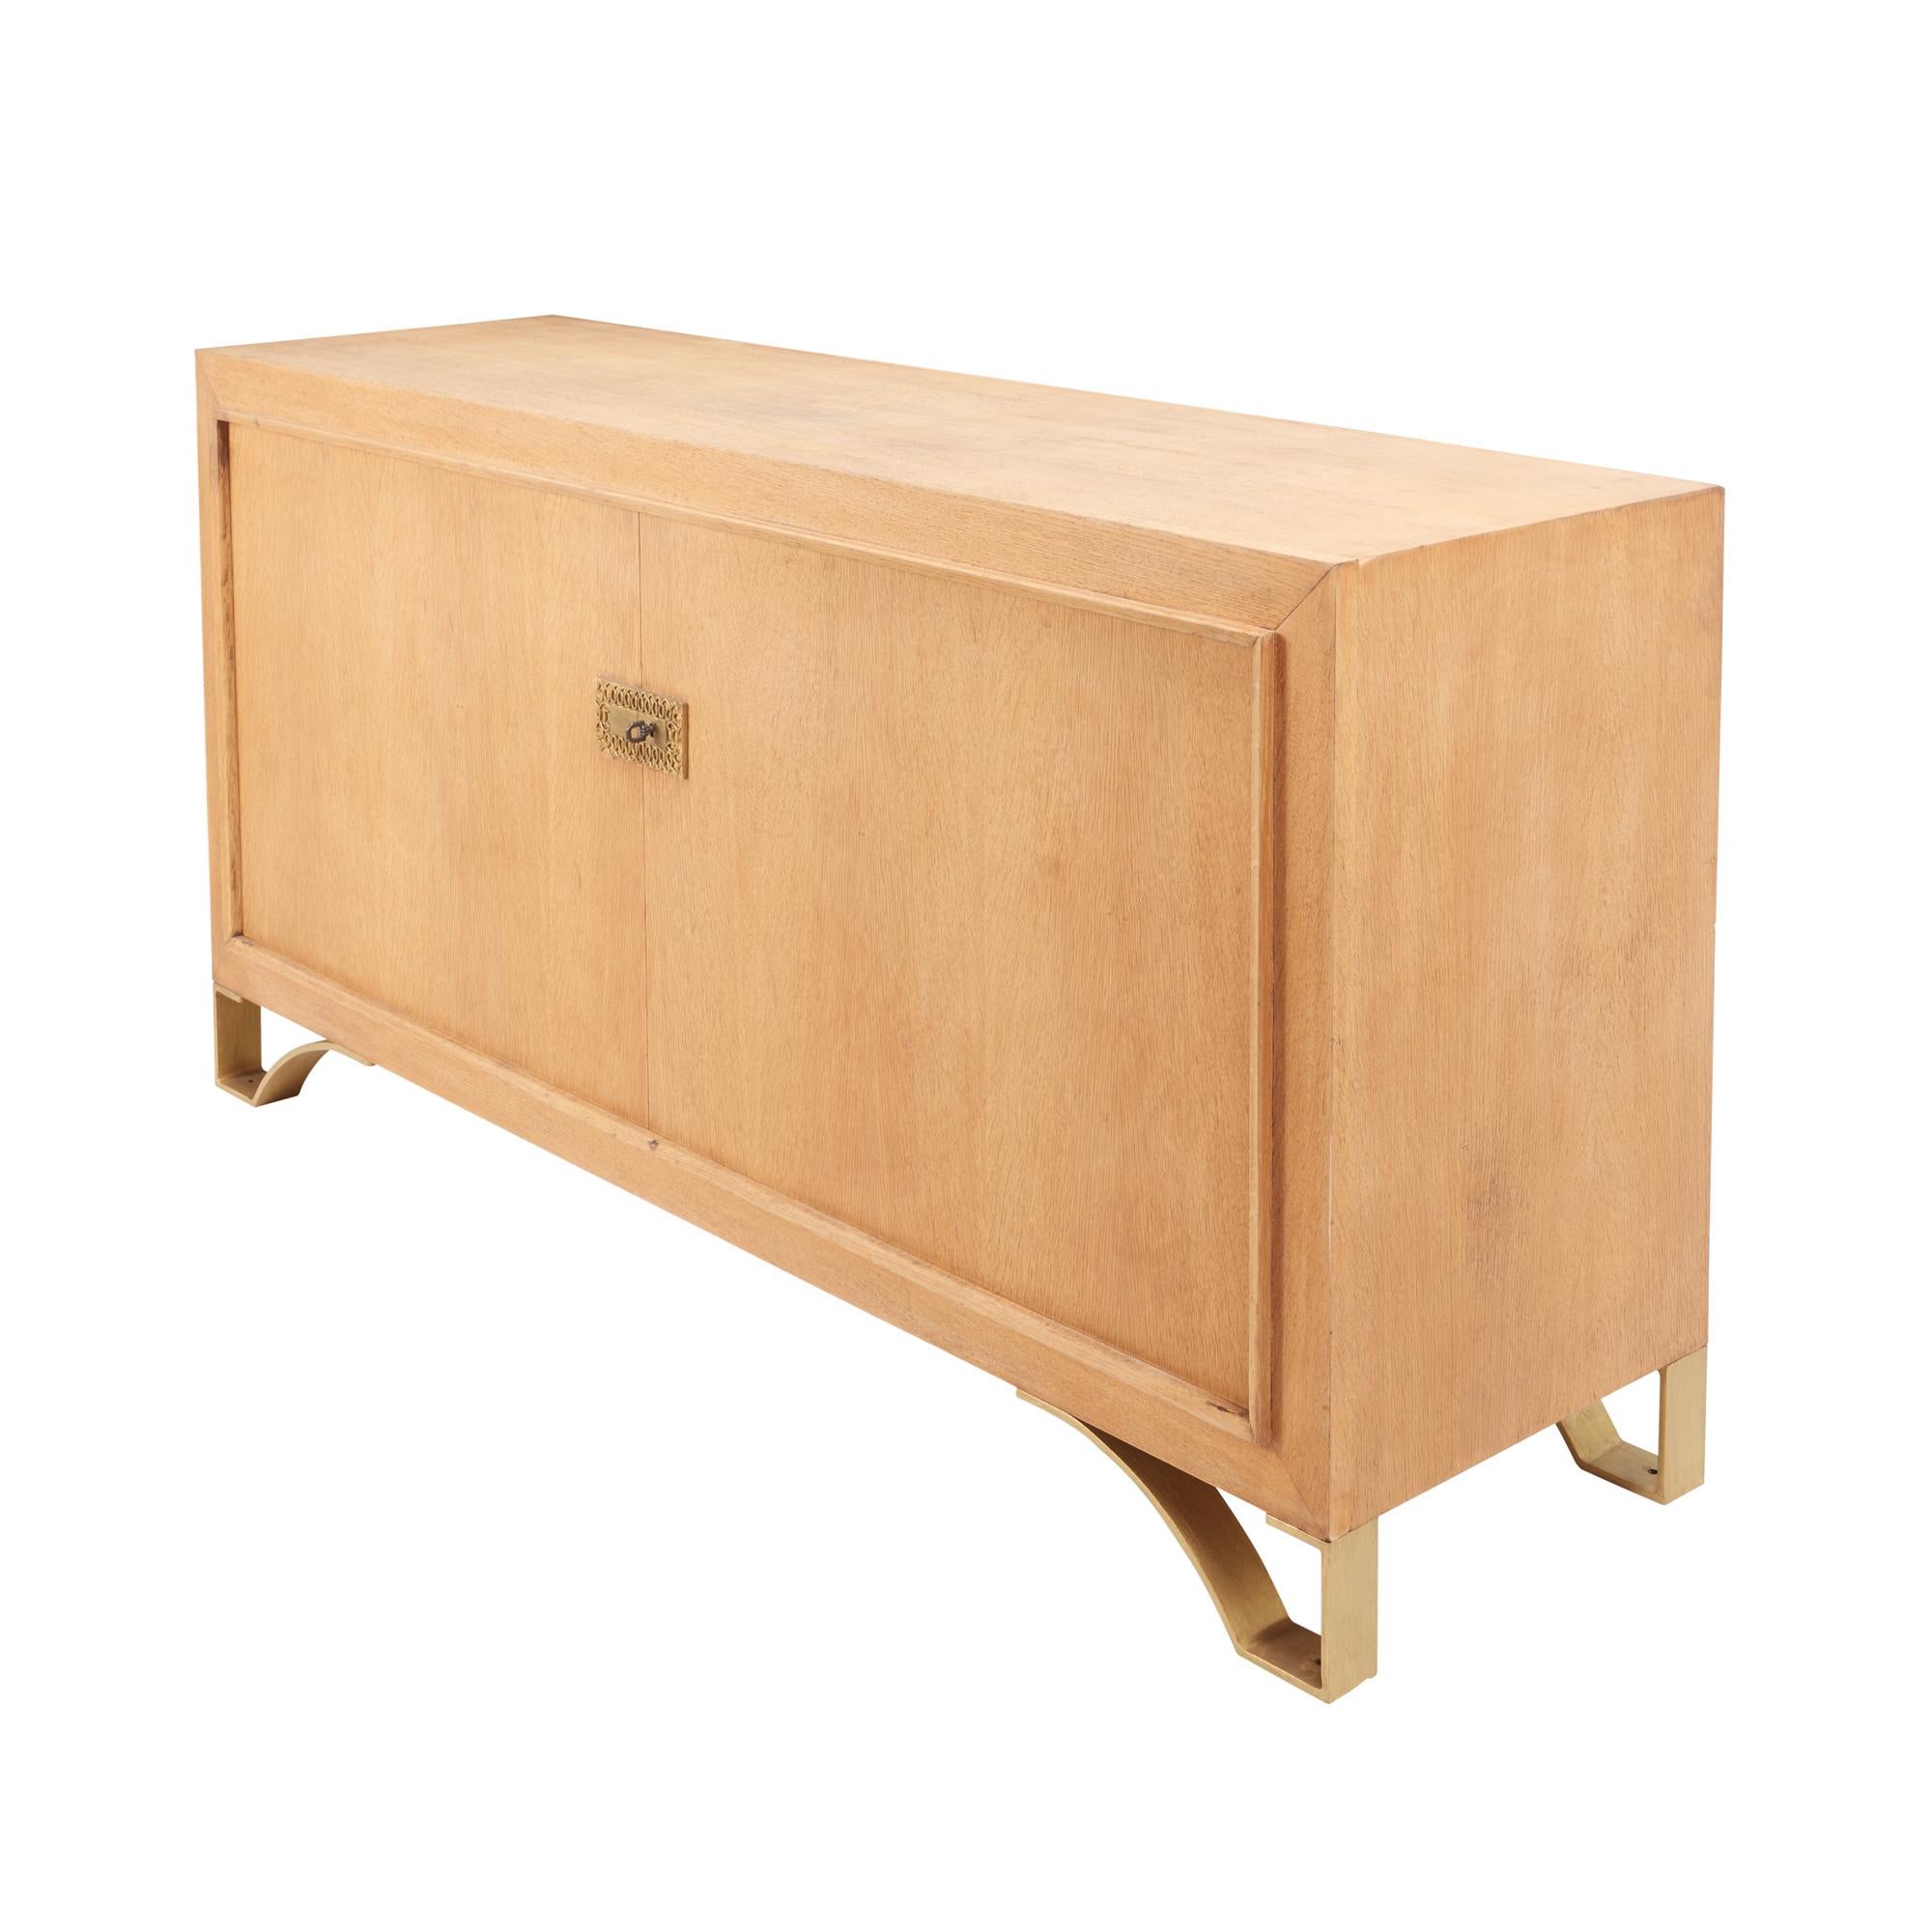 This midcentury rectangular buffet sits atop an elegant brass base. The keyplate adds a beautifully subtle detail to this simple yet stunning statement piece made of oak in the stylish French Cerused finish.

Since Schumacher was founded in 1889,